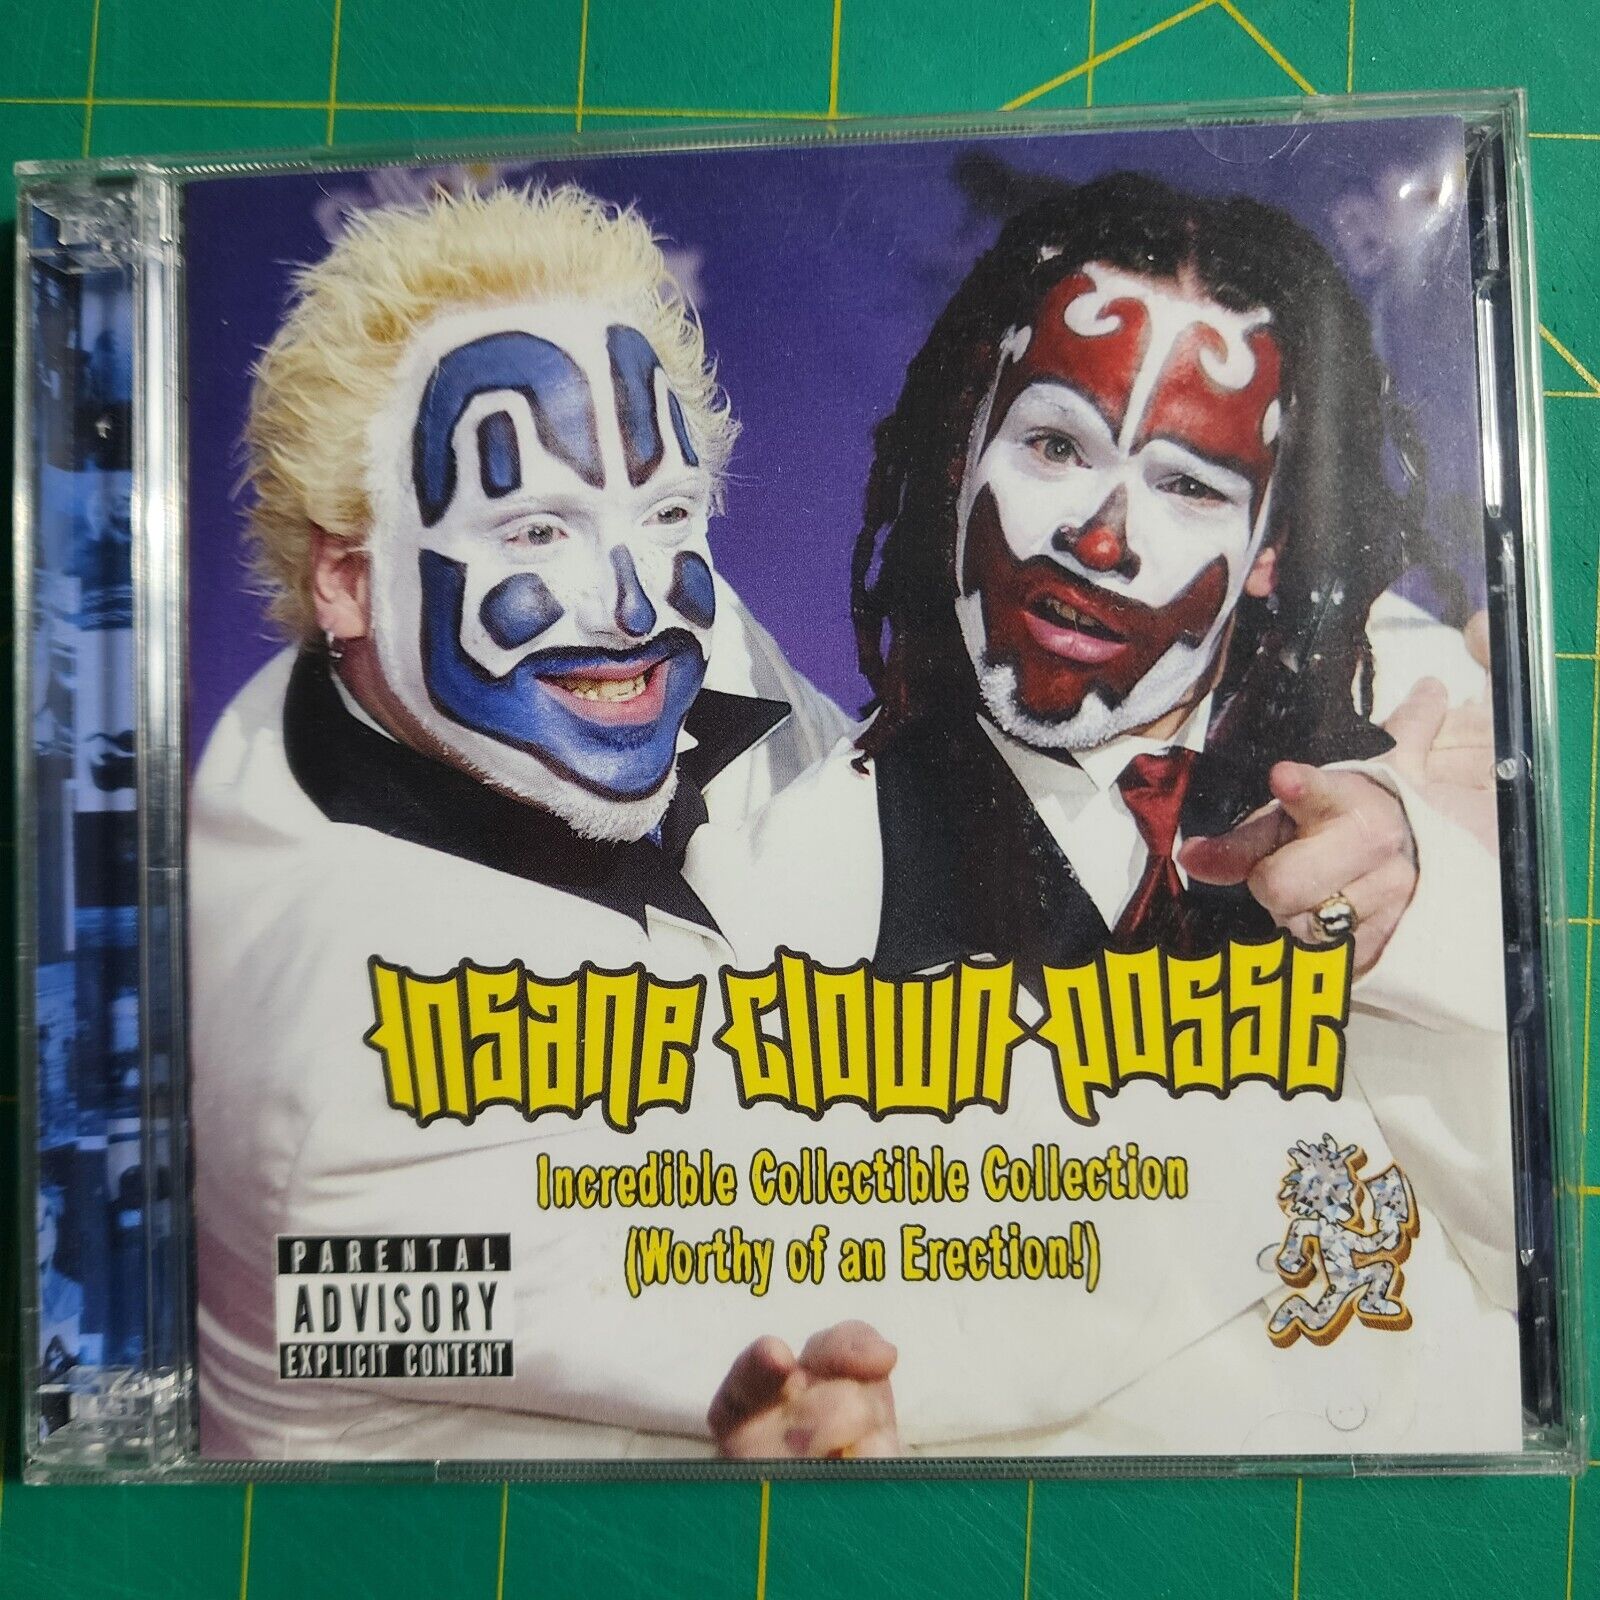 ICP INCREDIBLE COLLECTIBLE COLLECTION RARE INSANE CLOWN POSSE TWIZTID 2CD NEW